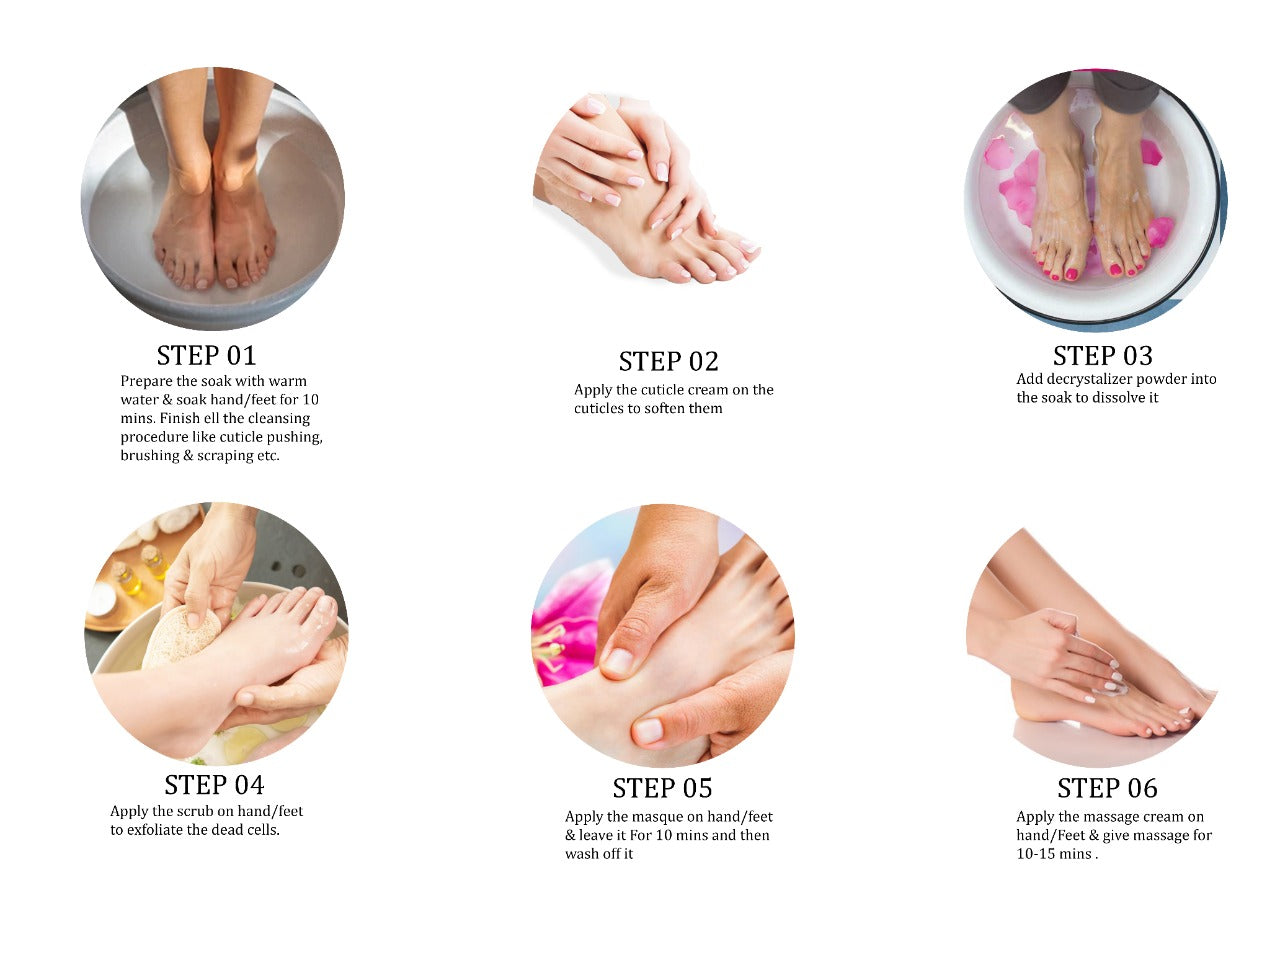 Instructions on how to use the Aaranyam Natural Pedicure Kit for best results